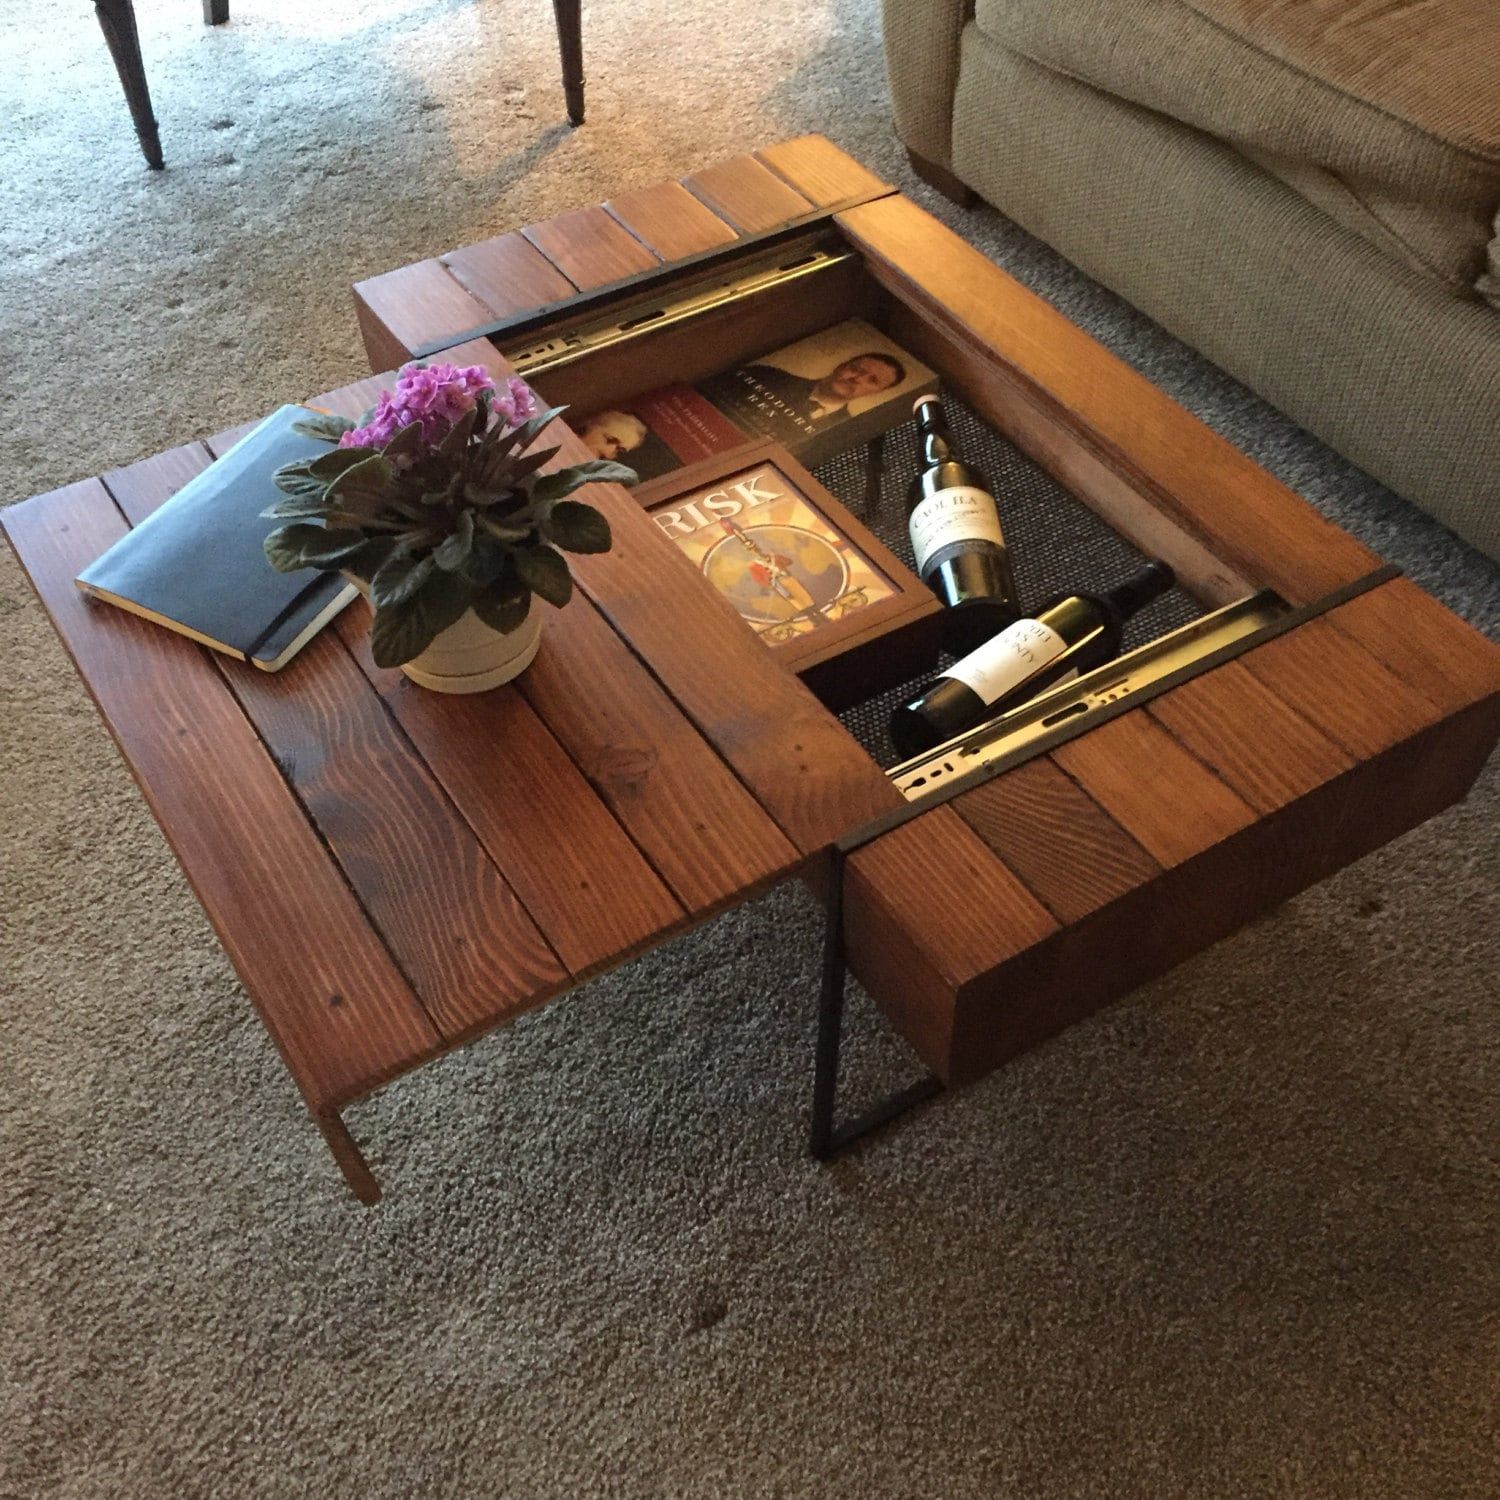 Block Coffee Table With Hidden Storage Within Modern Coffee Tables With Hidden Storage Compartments (Gallery 3 of 20)